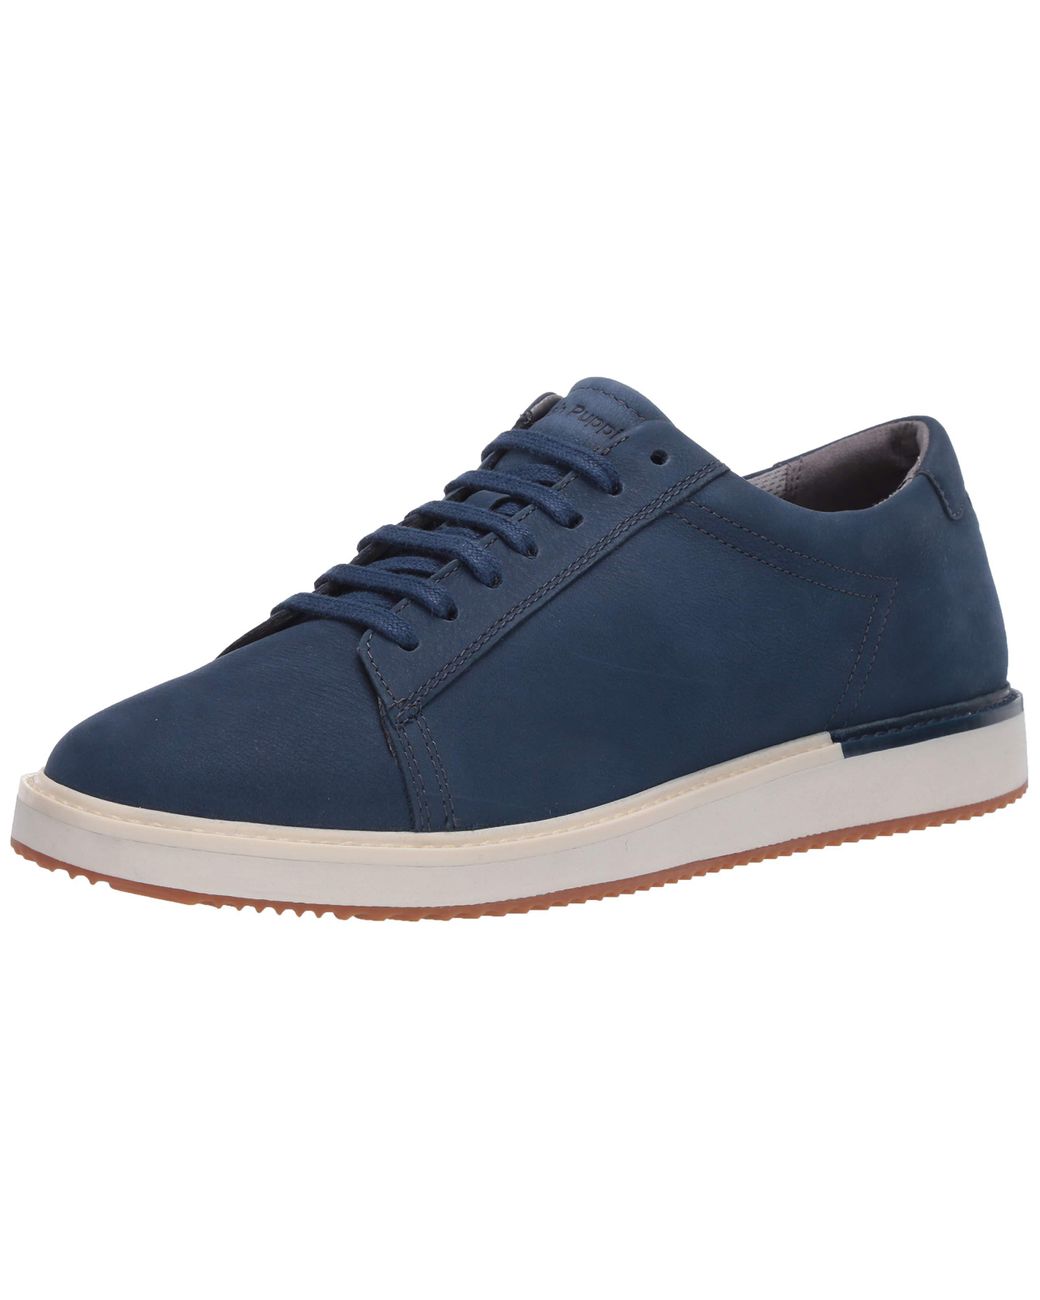 Hush Puppies Leather Heath Sneaker in Blue for Men - Save 38% - Lyst